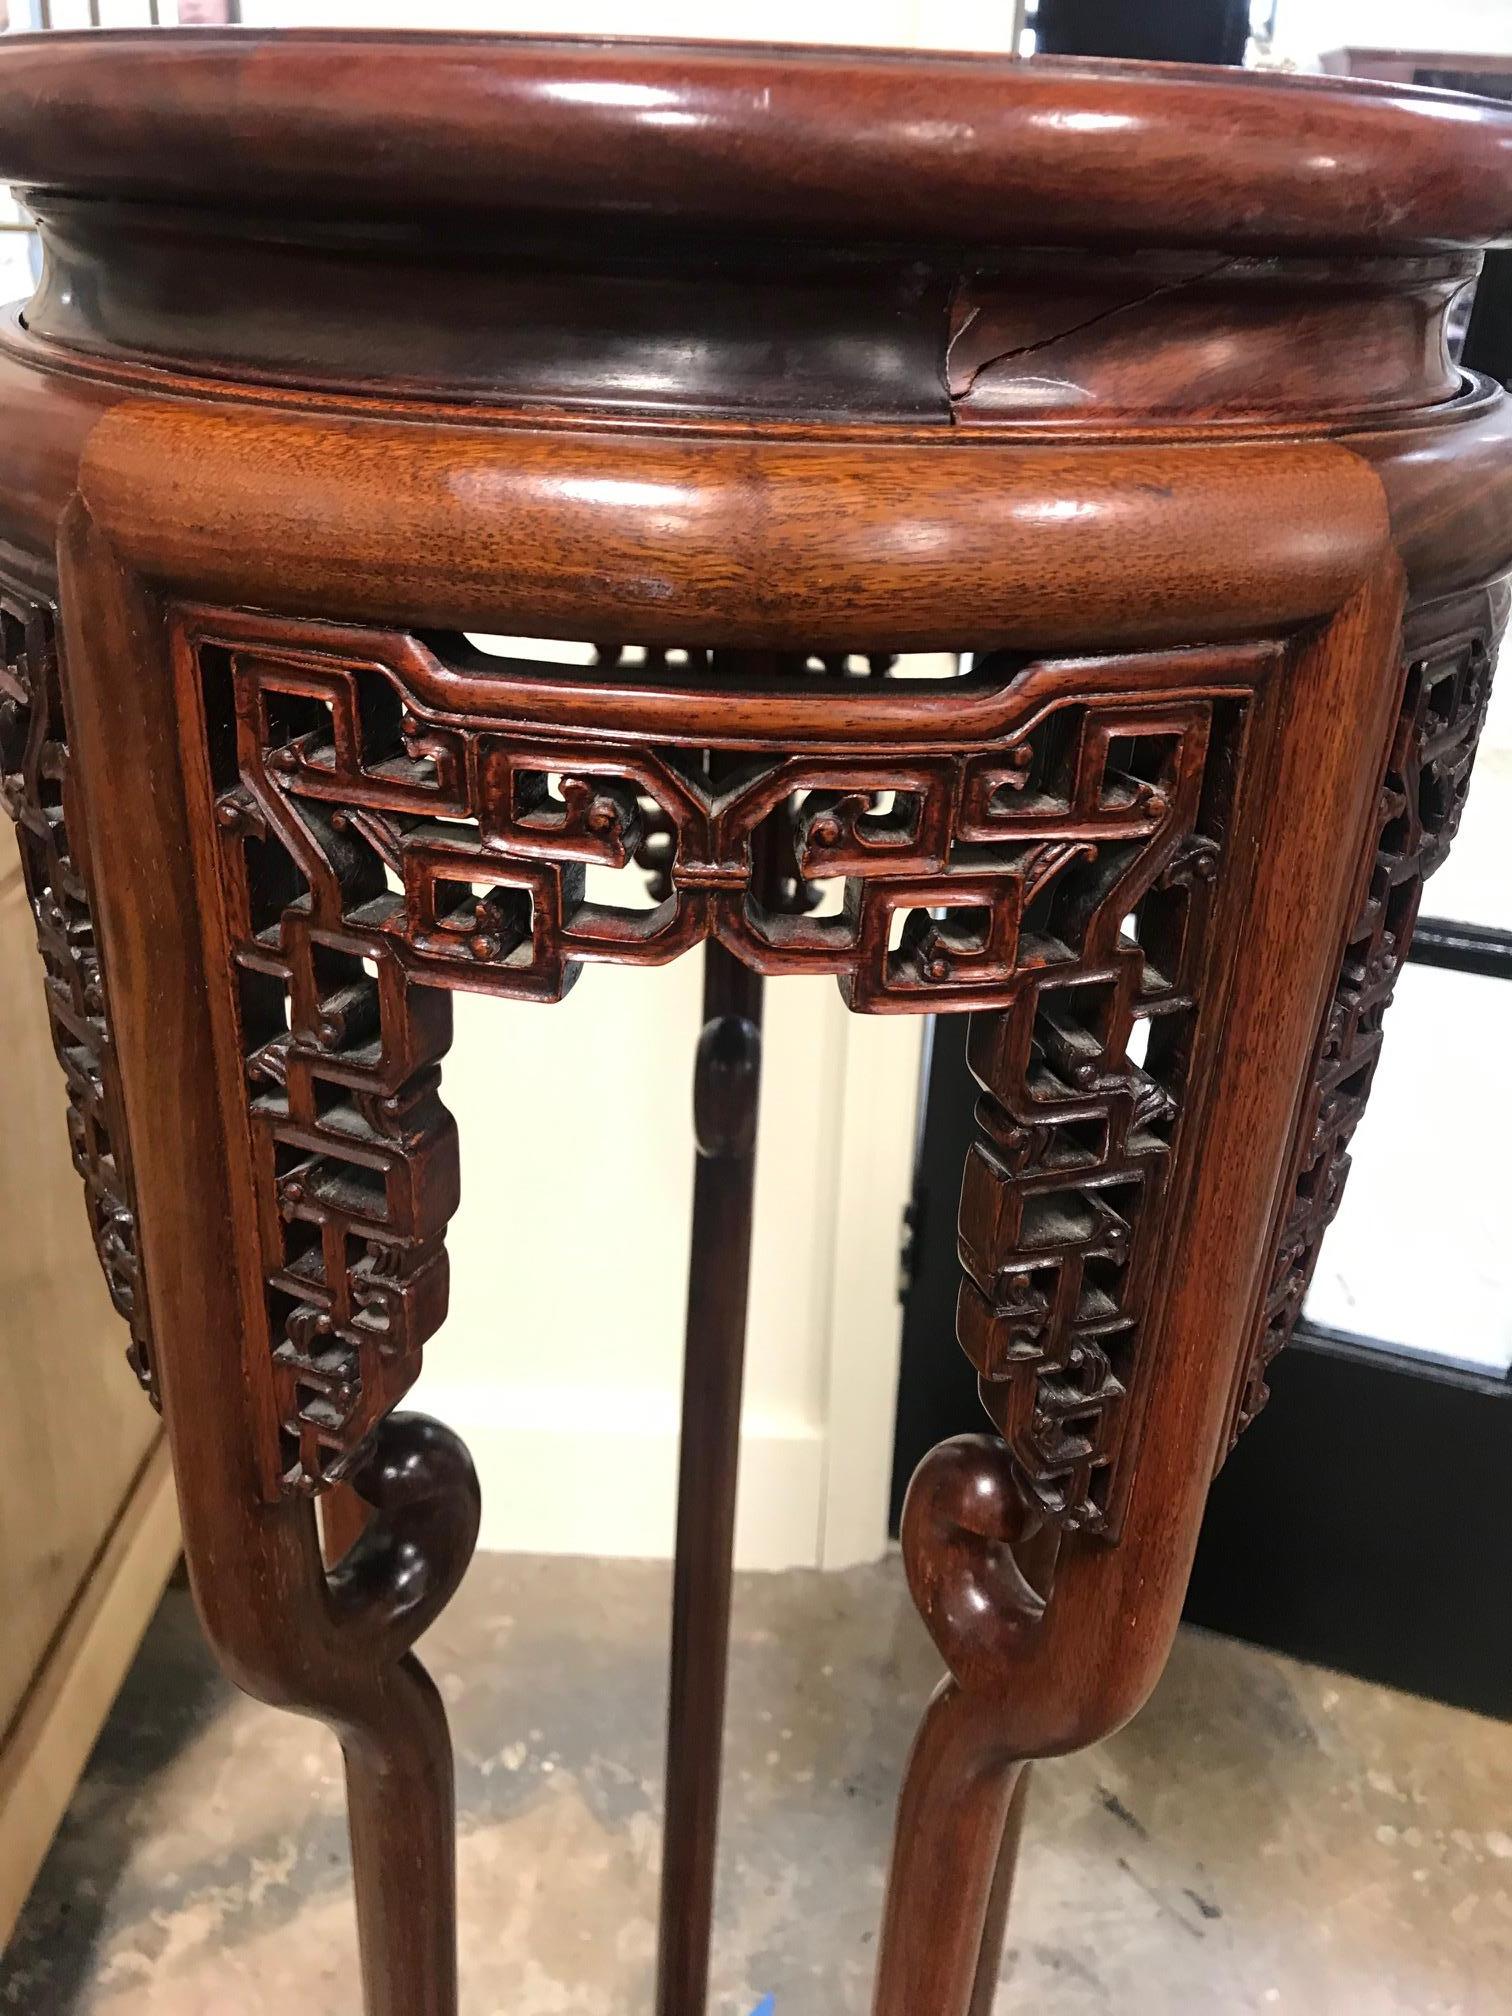 A beautiful rosewood plant stand which is heavily hand carved on the top and below.